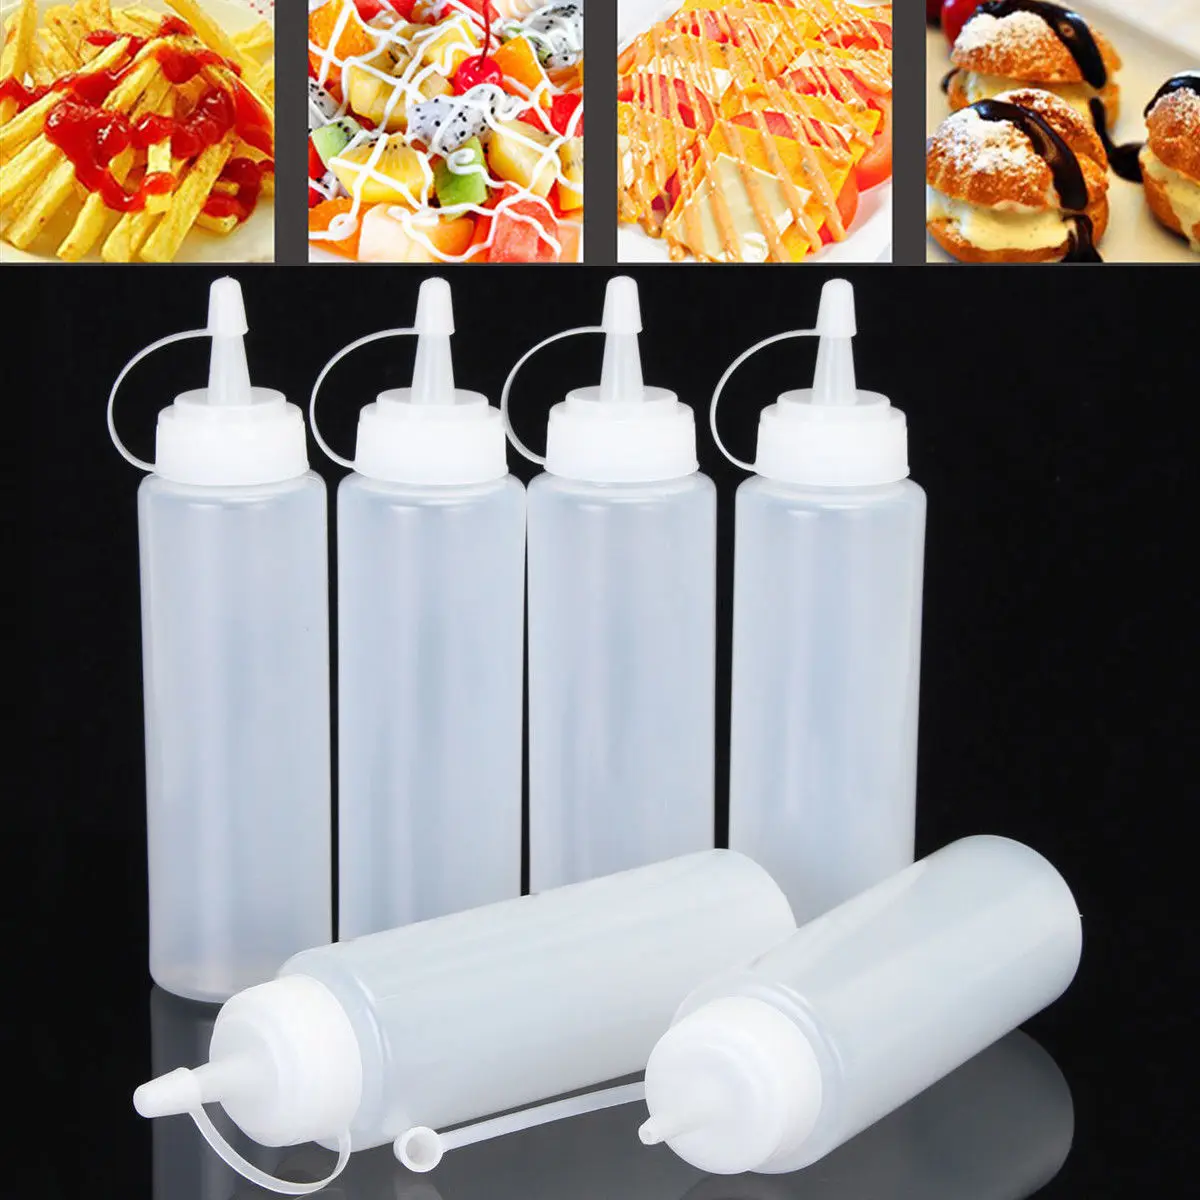 1/3pcs PE Condiment Squeeze Bottles for Ketchup Mustard Mayo Hot Sauces  Olive Oil Bottles Kitchen Gadget